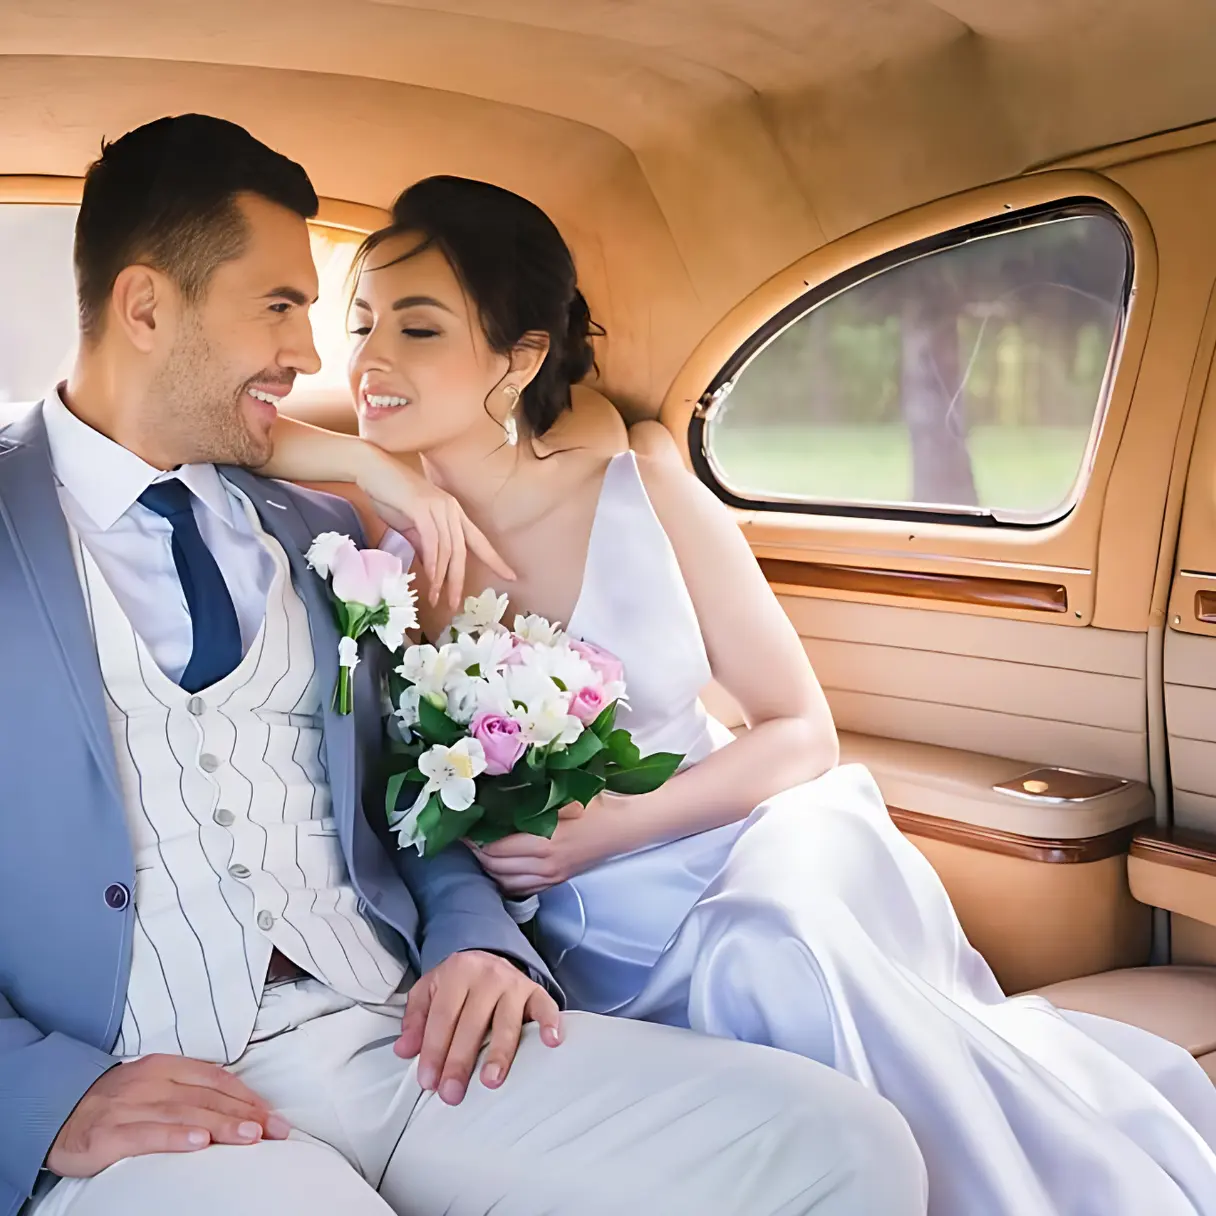 Party On Wheels - Wedding Transportation Services